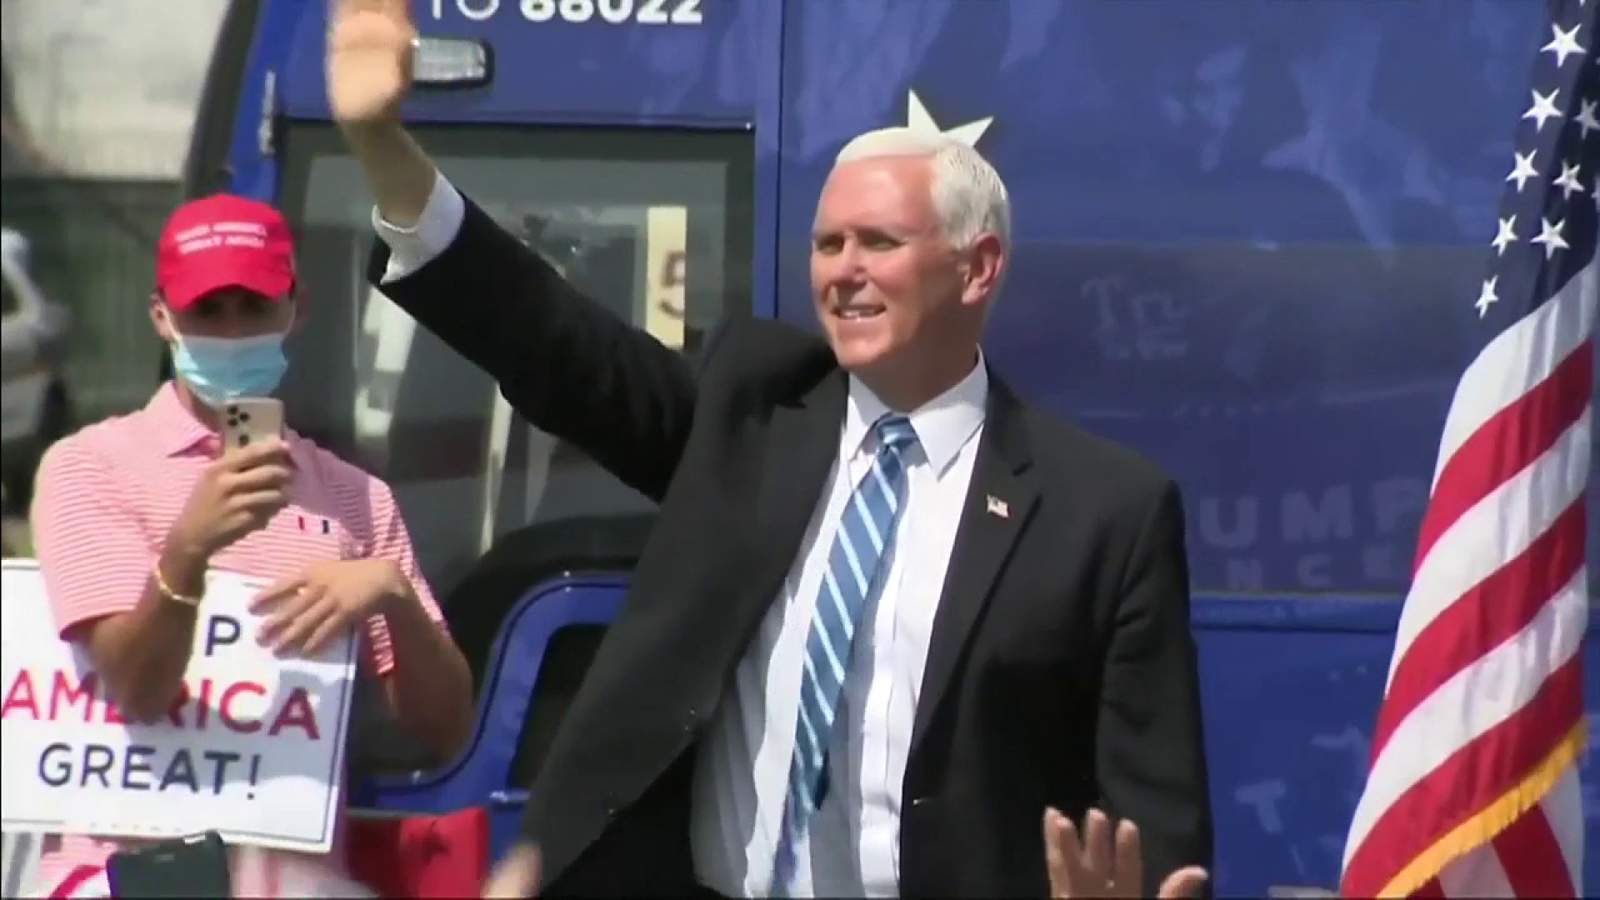 Pence tells Miami-Dade that Trump needs 4 more years — in multiple languages